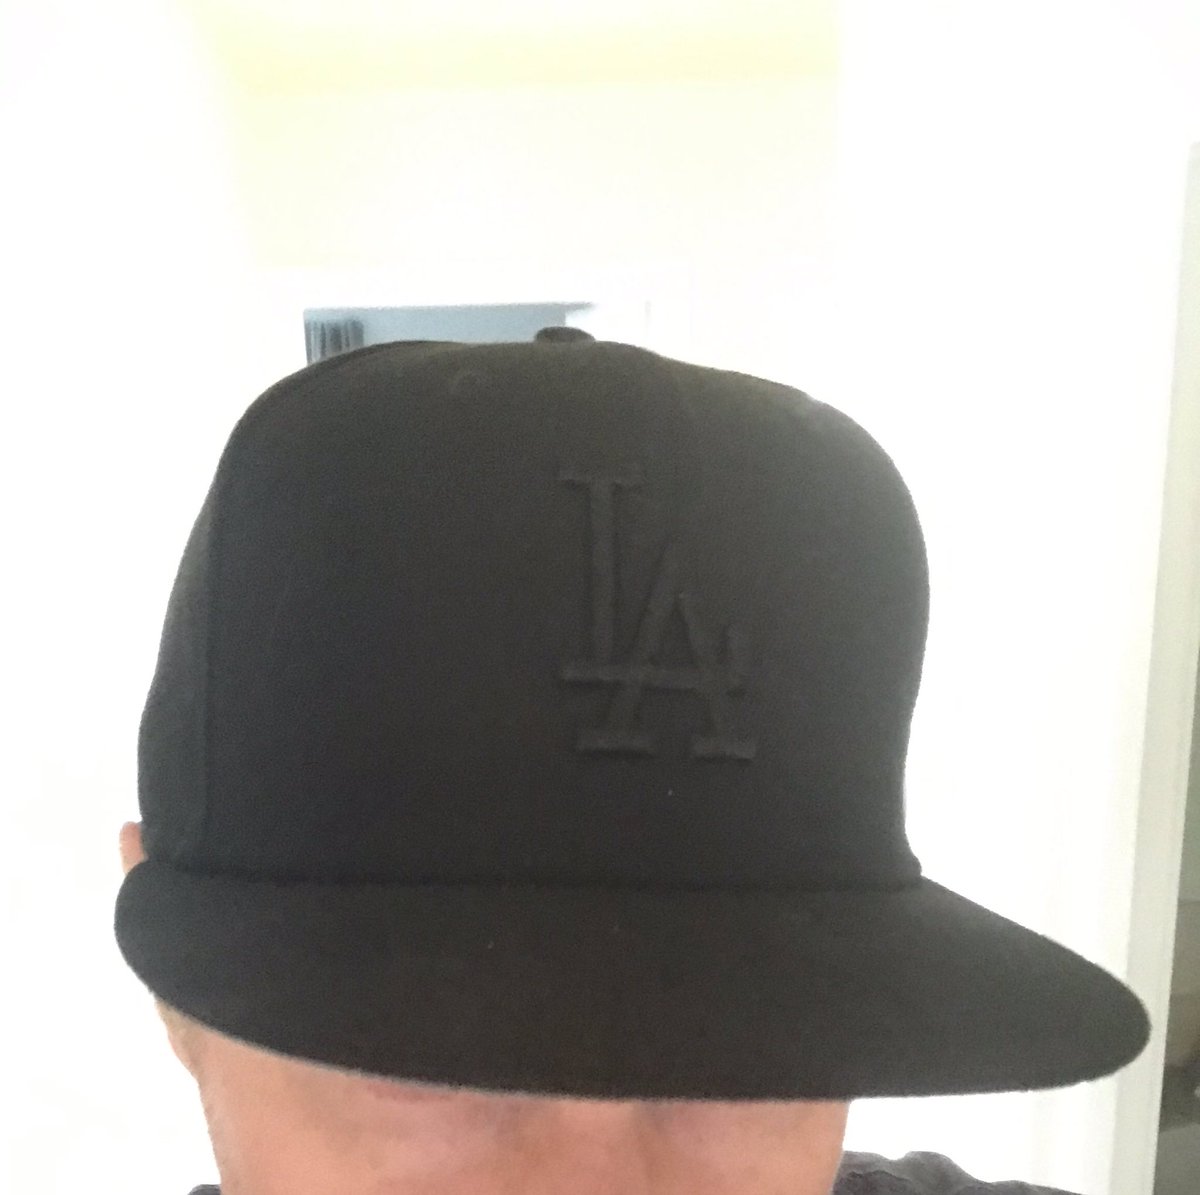 At the start of the 2018 season, the Dodgers were on a schneid so I bought this hat in a sort of “embrace the darkness” mode, and then they went 76-45 and won the division after a 16-26 start, but I’m still not a guy who can pull off the black-on-black, honestly.